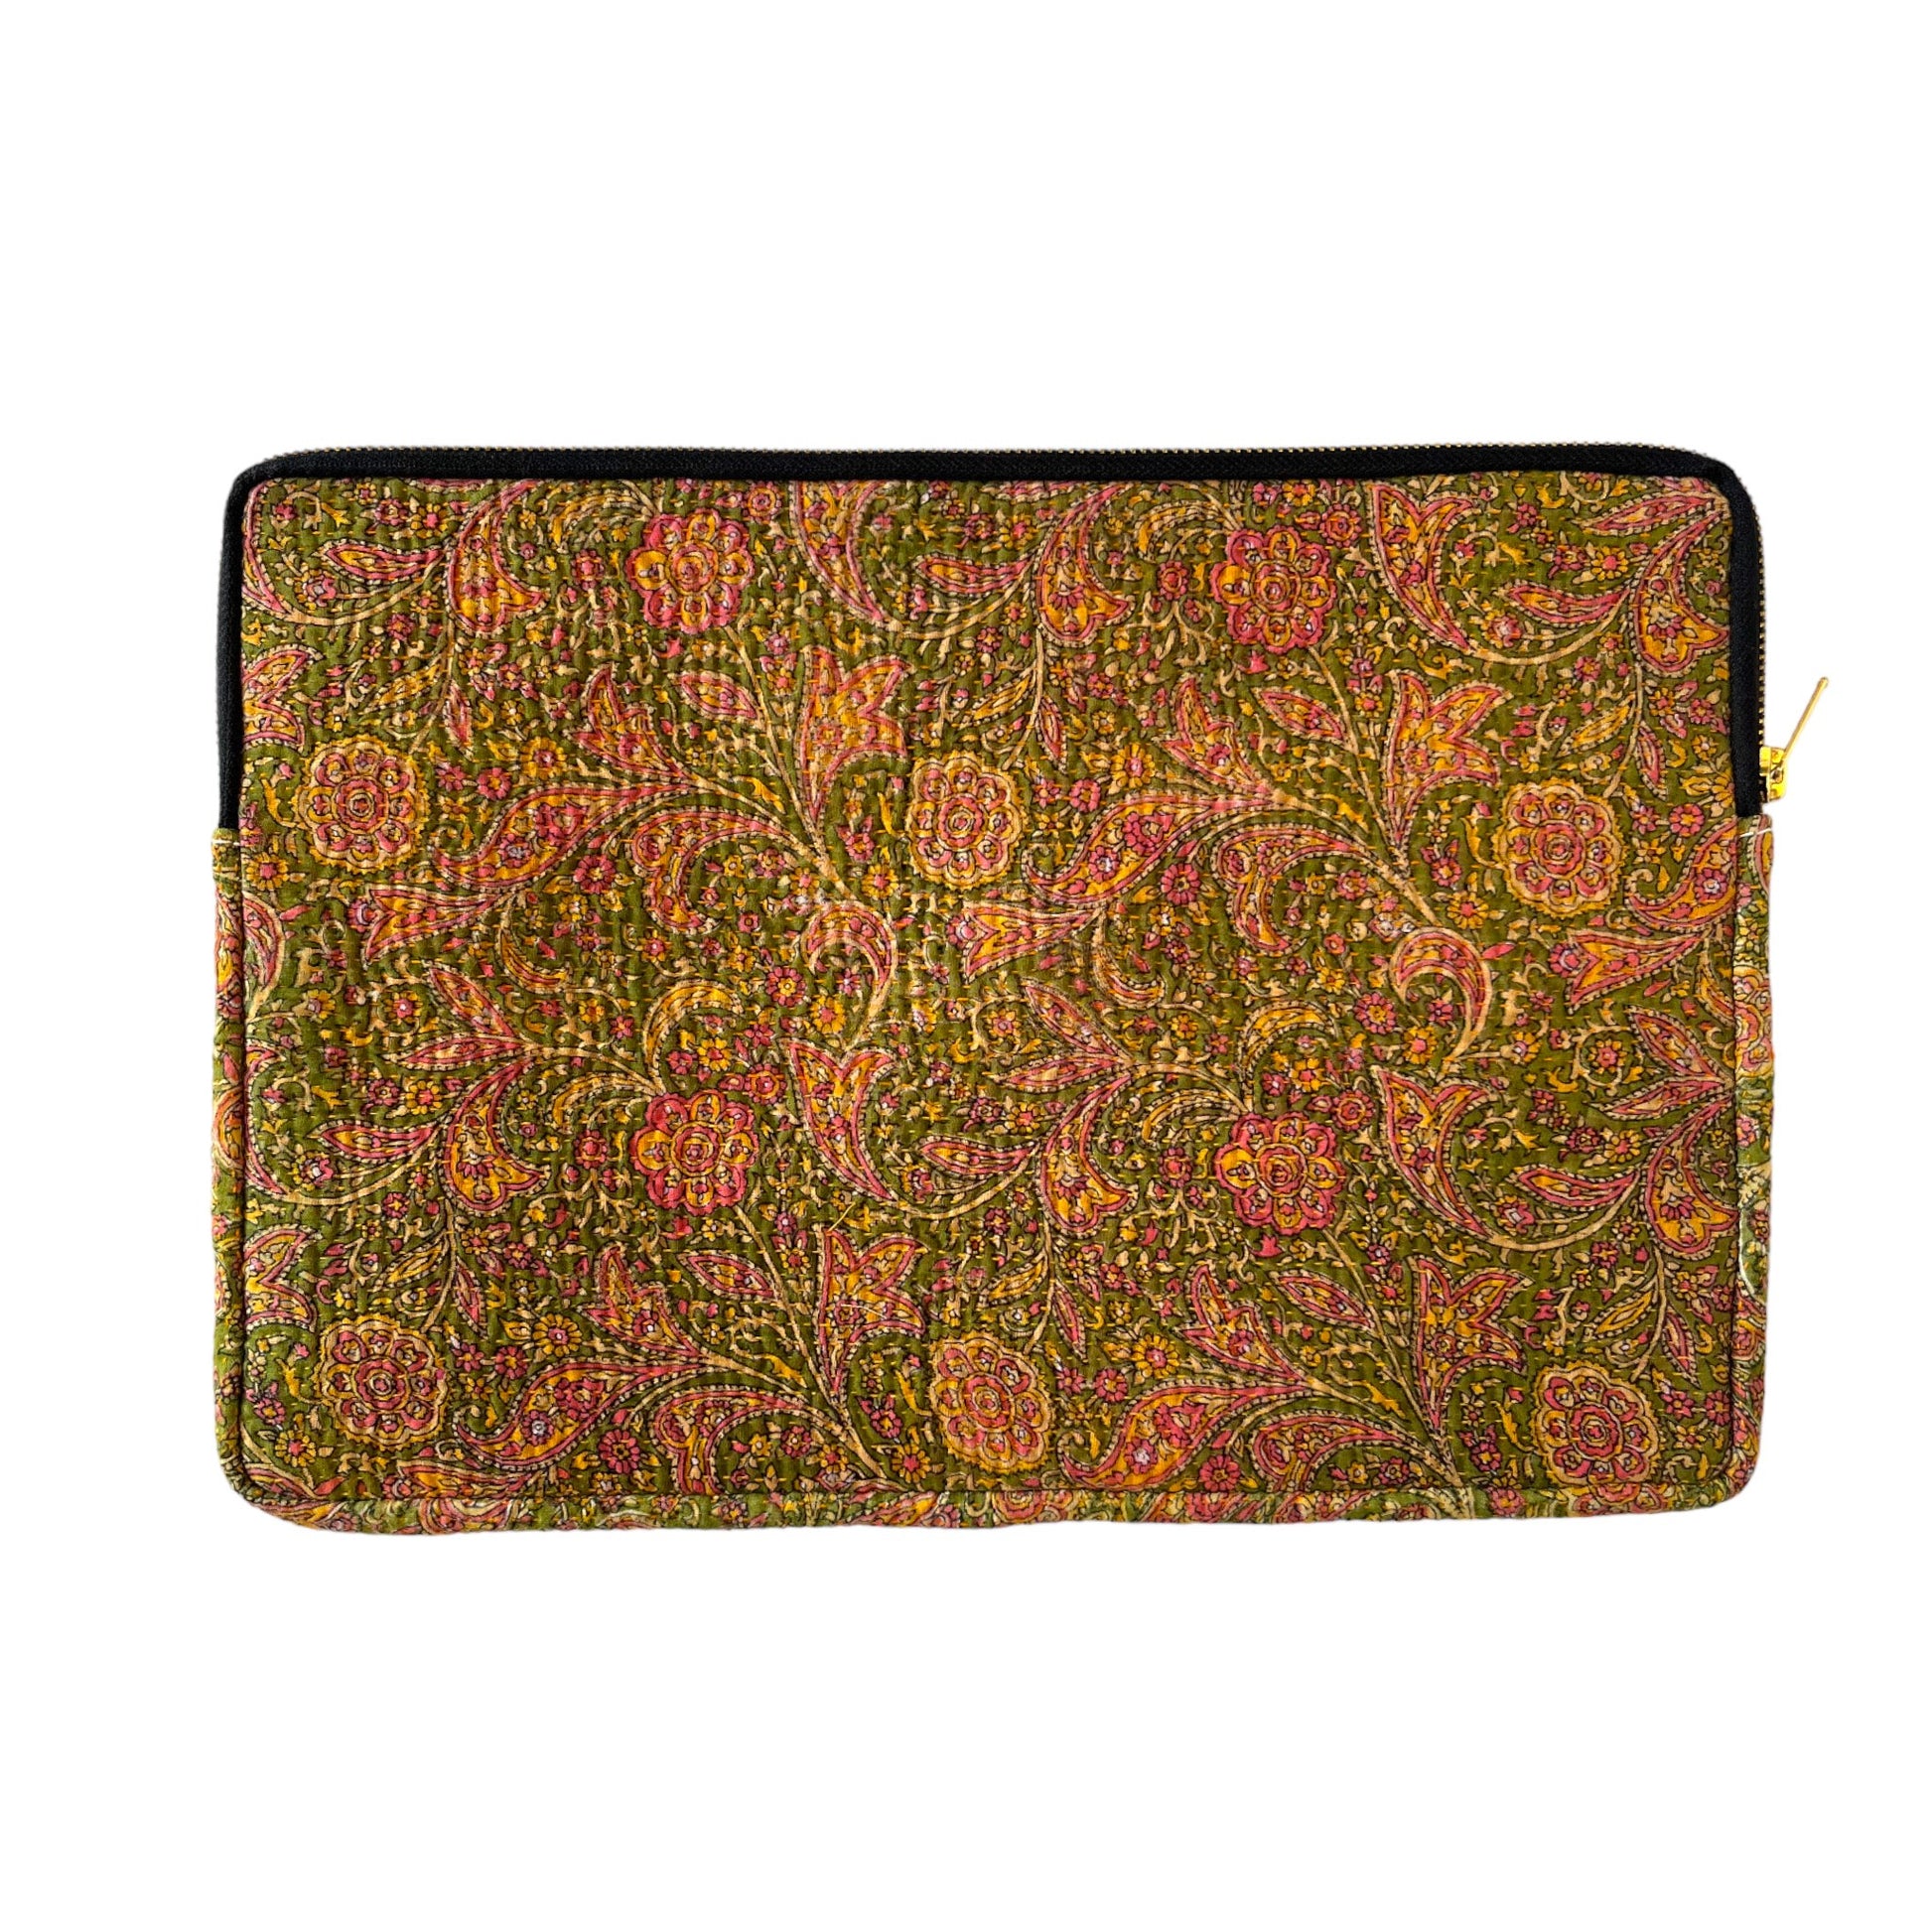 Lap top cover made from vintage kantha